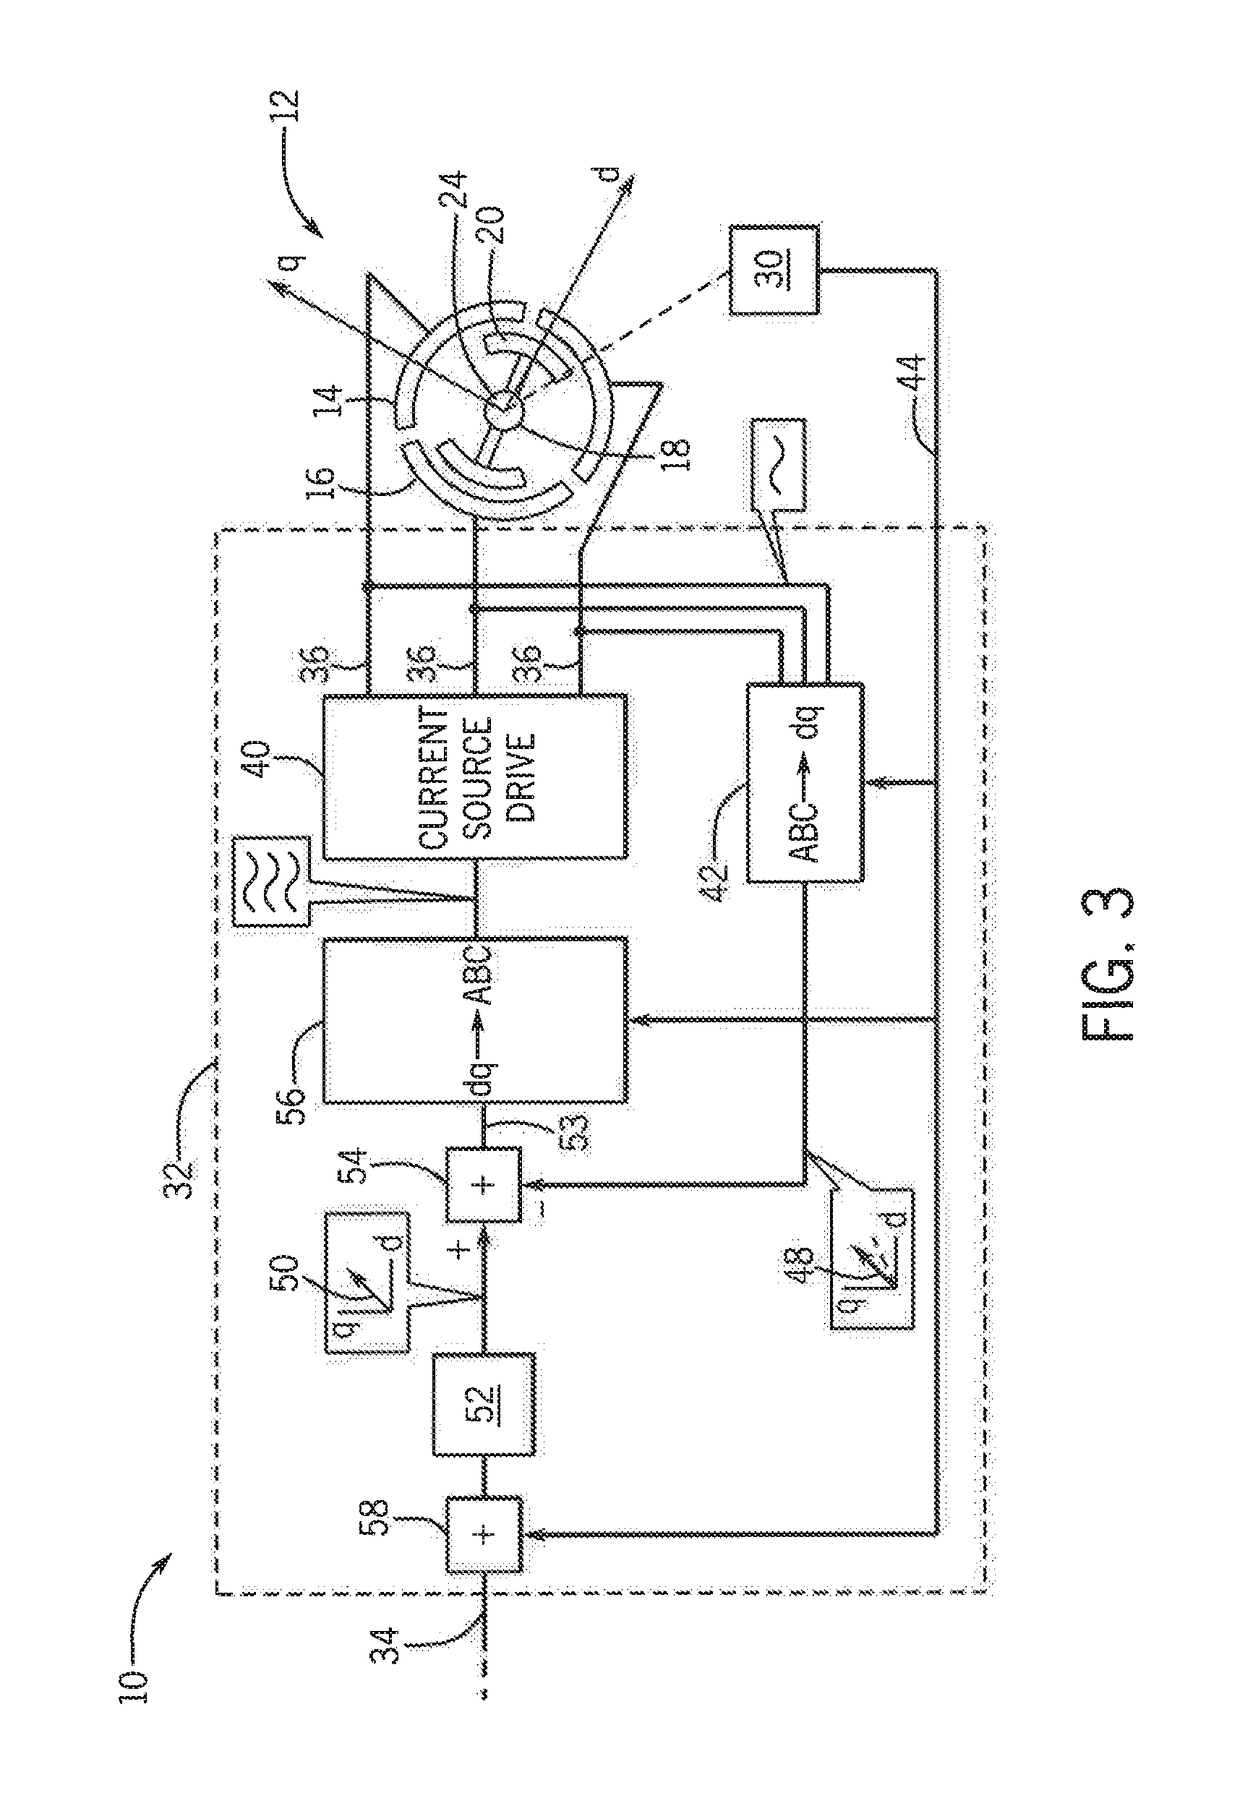 Variable frequency electrostatic drive